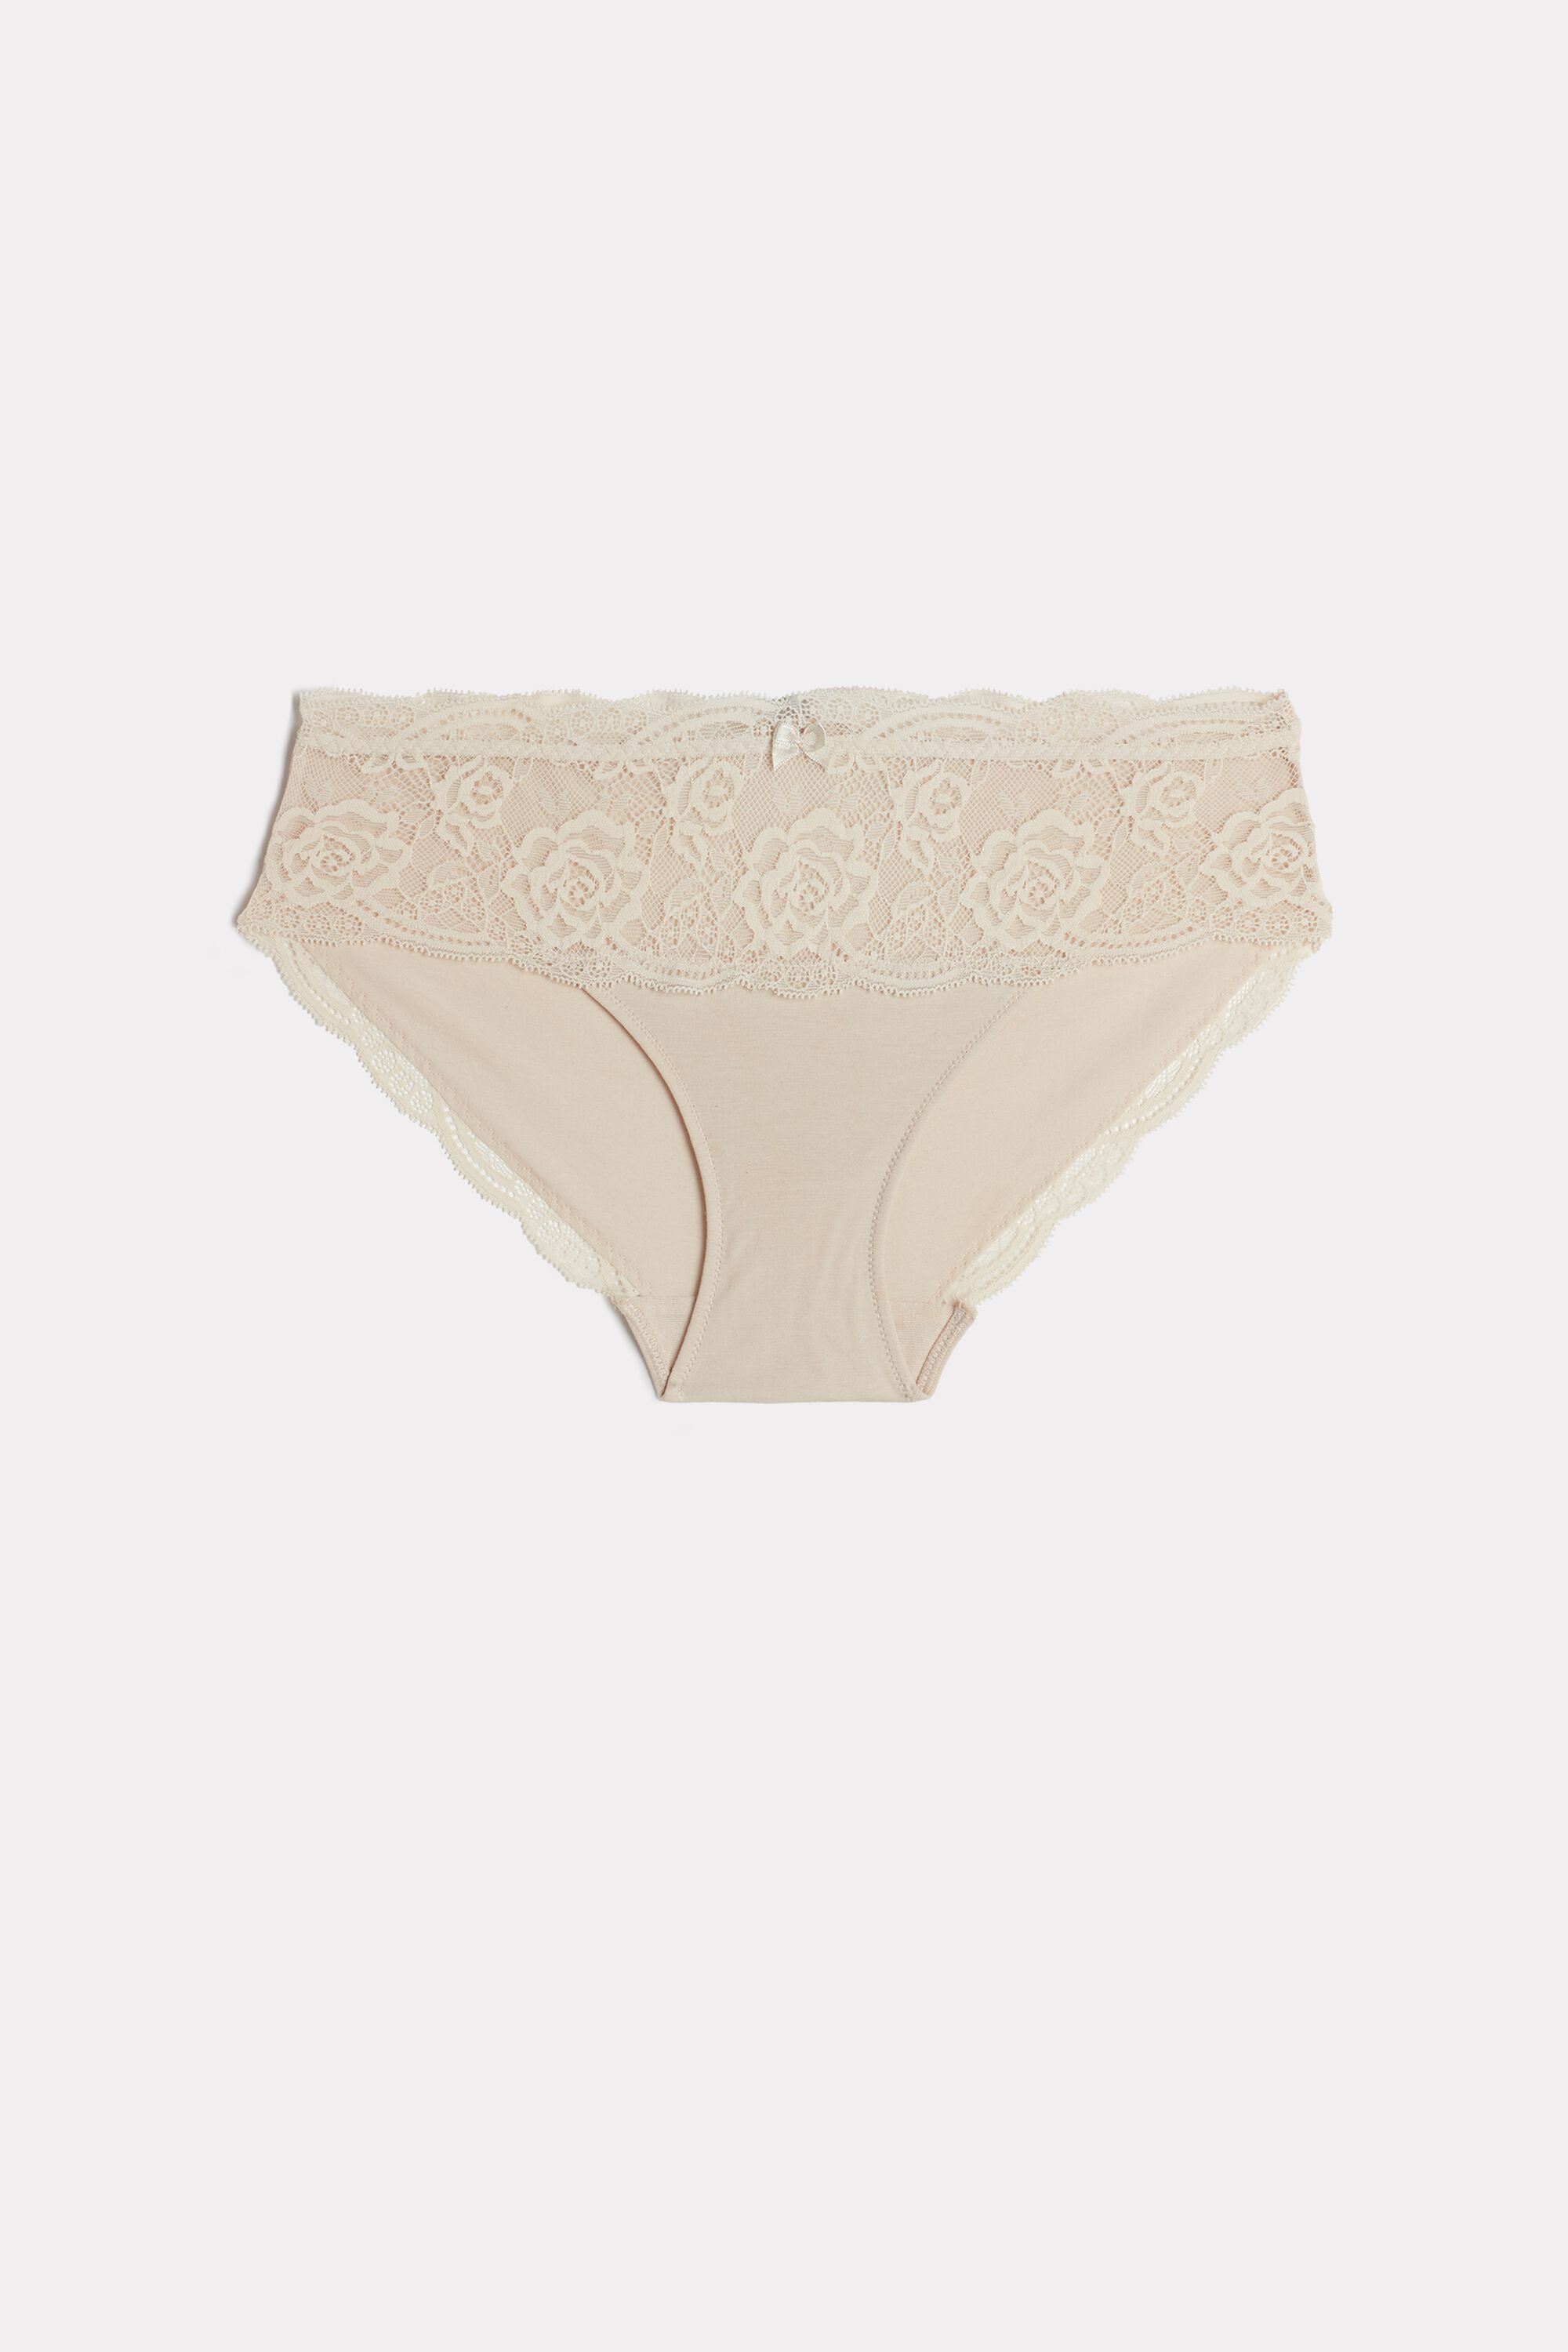 Semi-High Rise Briefs in Lace and Natural Cotton | Intimissimi